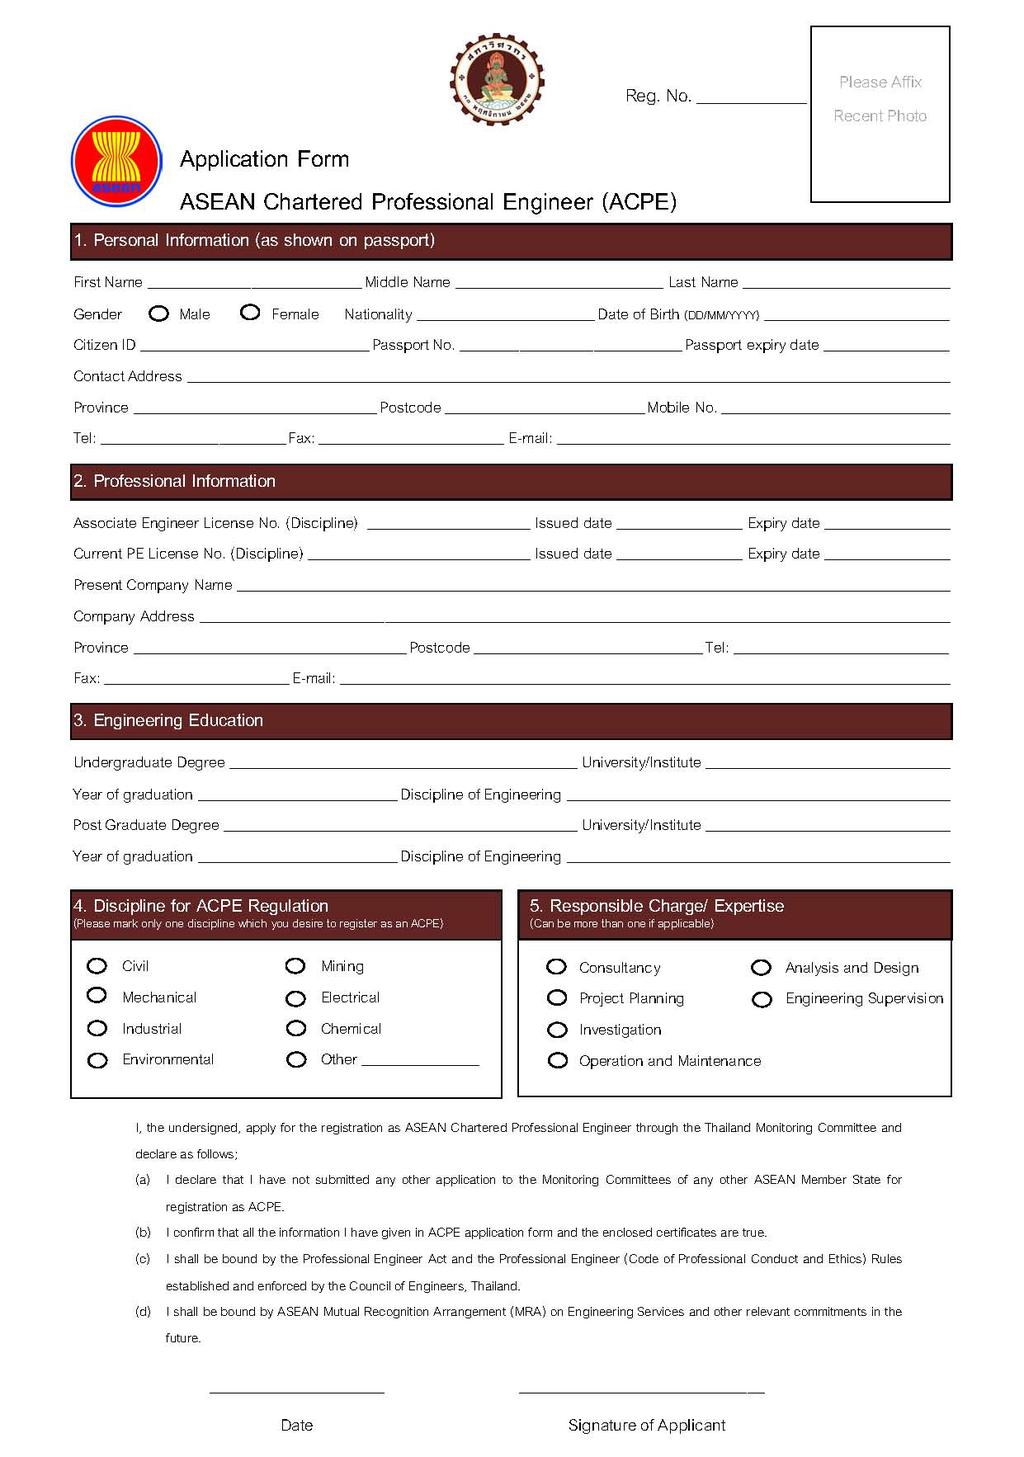 Application form for registration as an ACPE